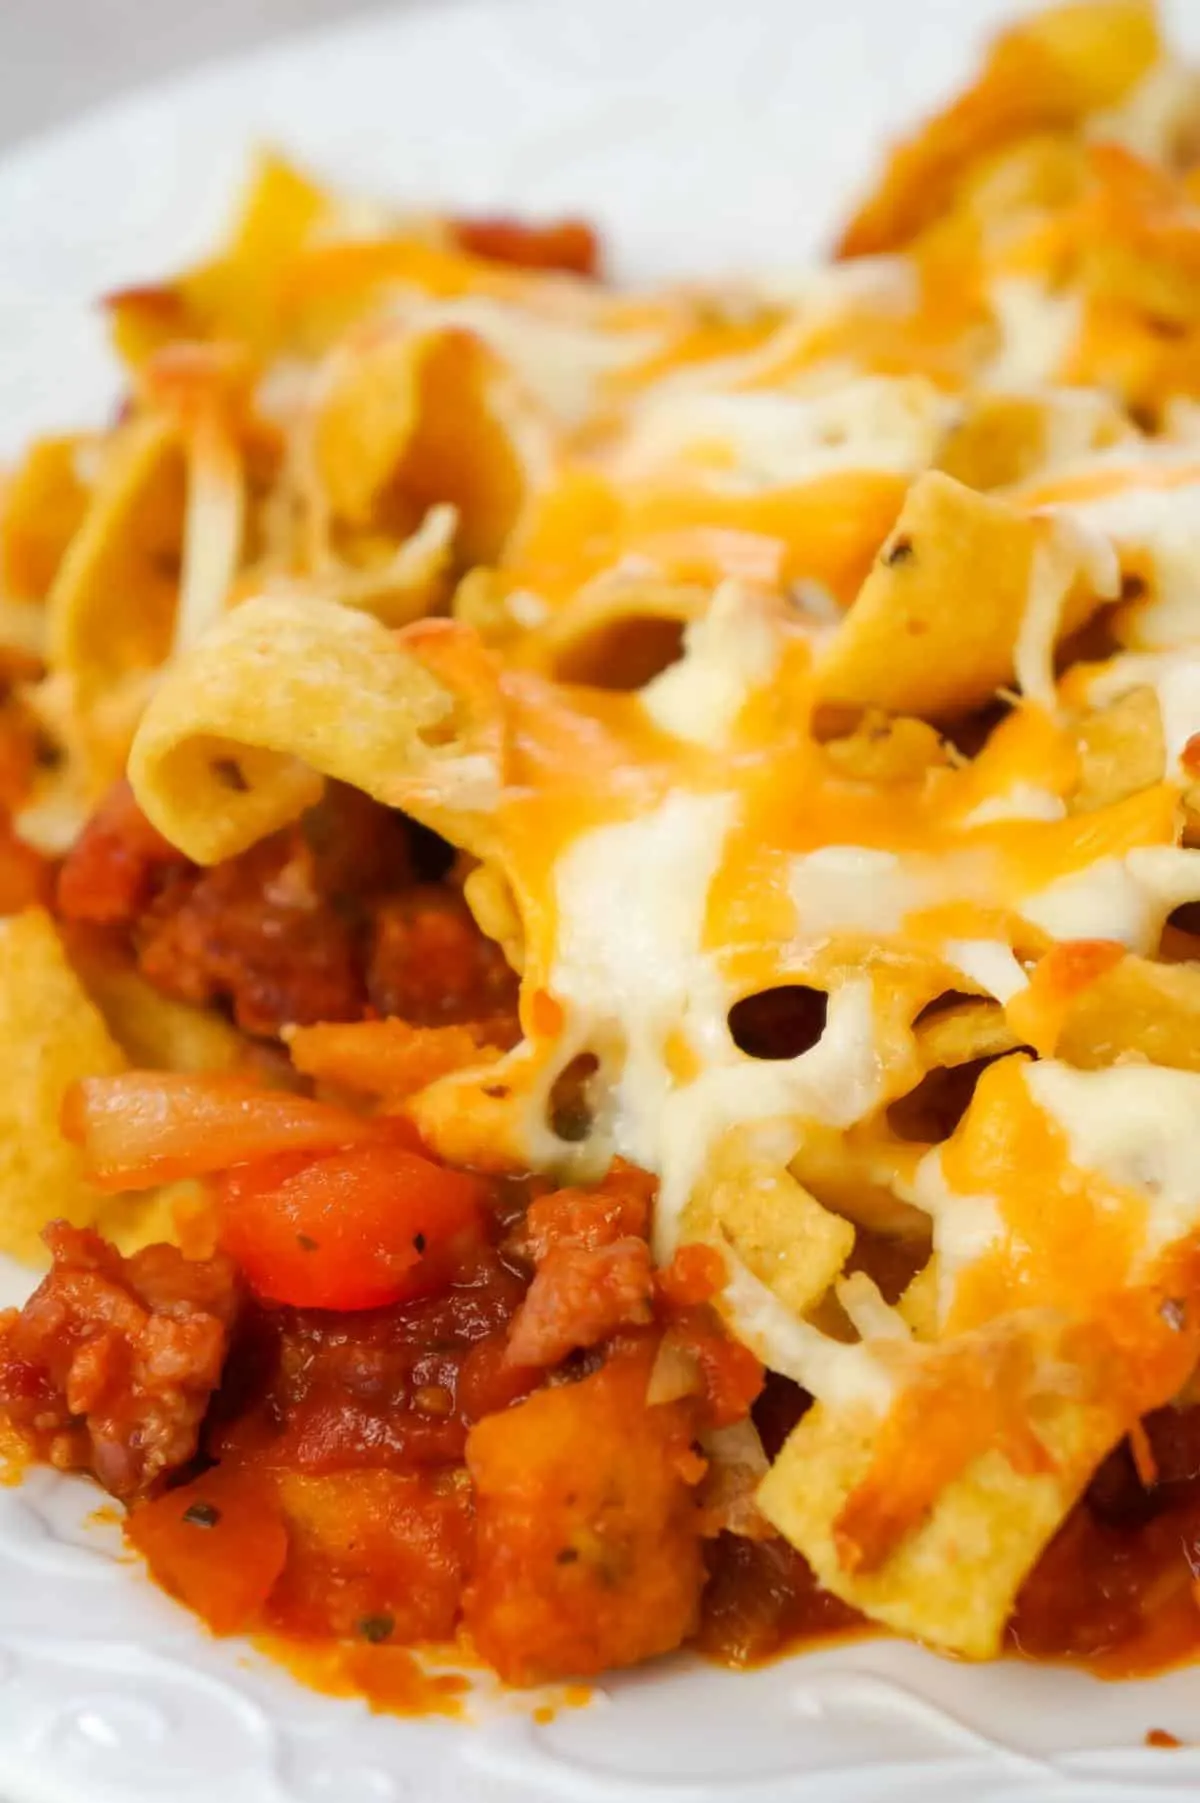 Sausage and Peppers Frito Pie is a delicious casserole recipe made with Italian pork sausage meat, onions and bell pepper tossed in a sweet and spicy tomato sauce and topped with Fritos corn chips and shredded cheese.